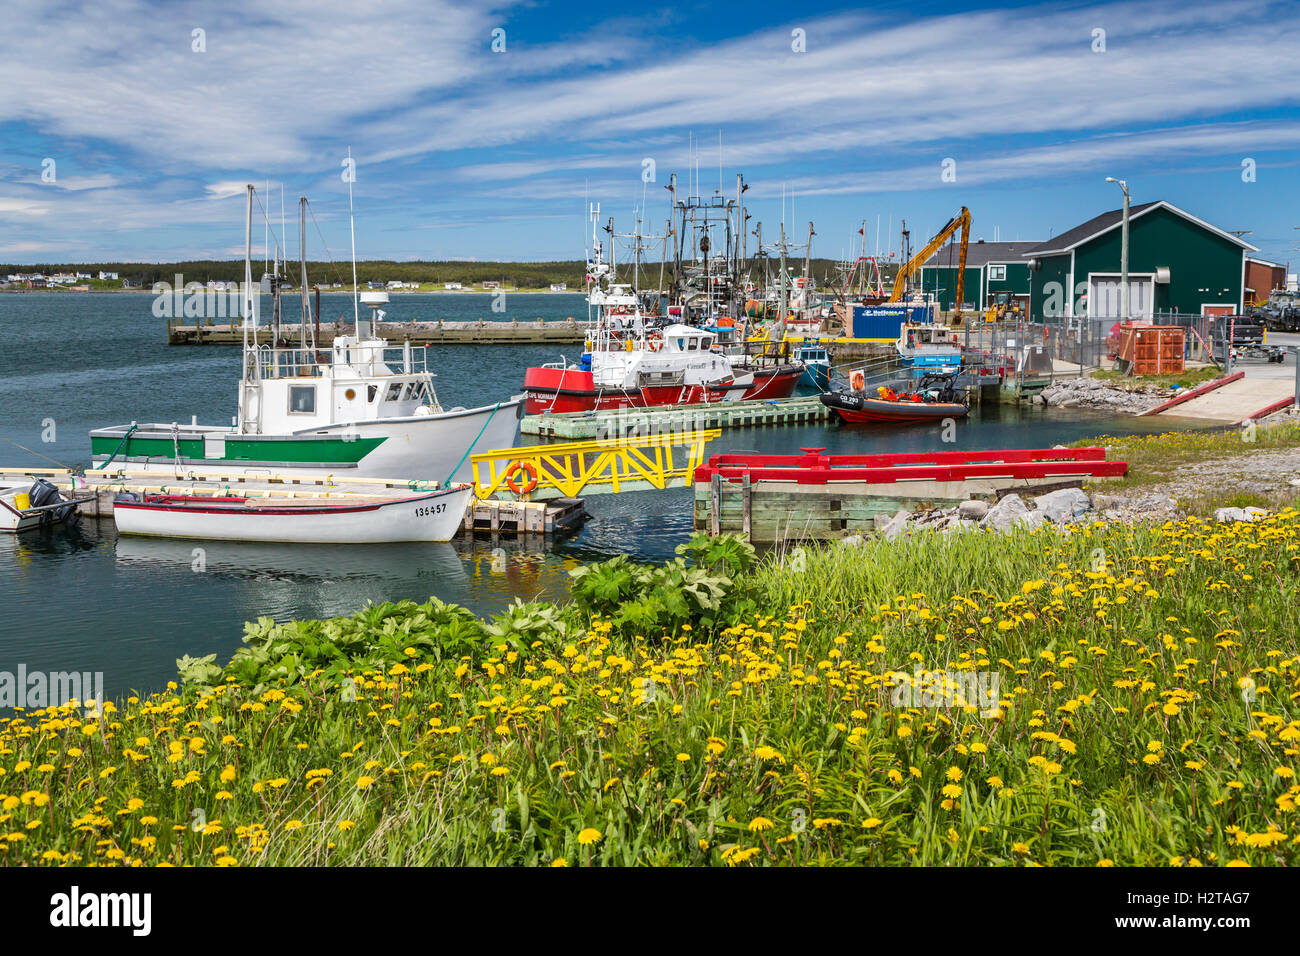 Fishing boats at the dock in the harbor of Port au Choix, Newfoundland and Labrador, Canada. Stock Photo